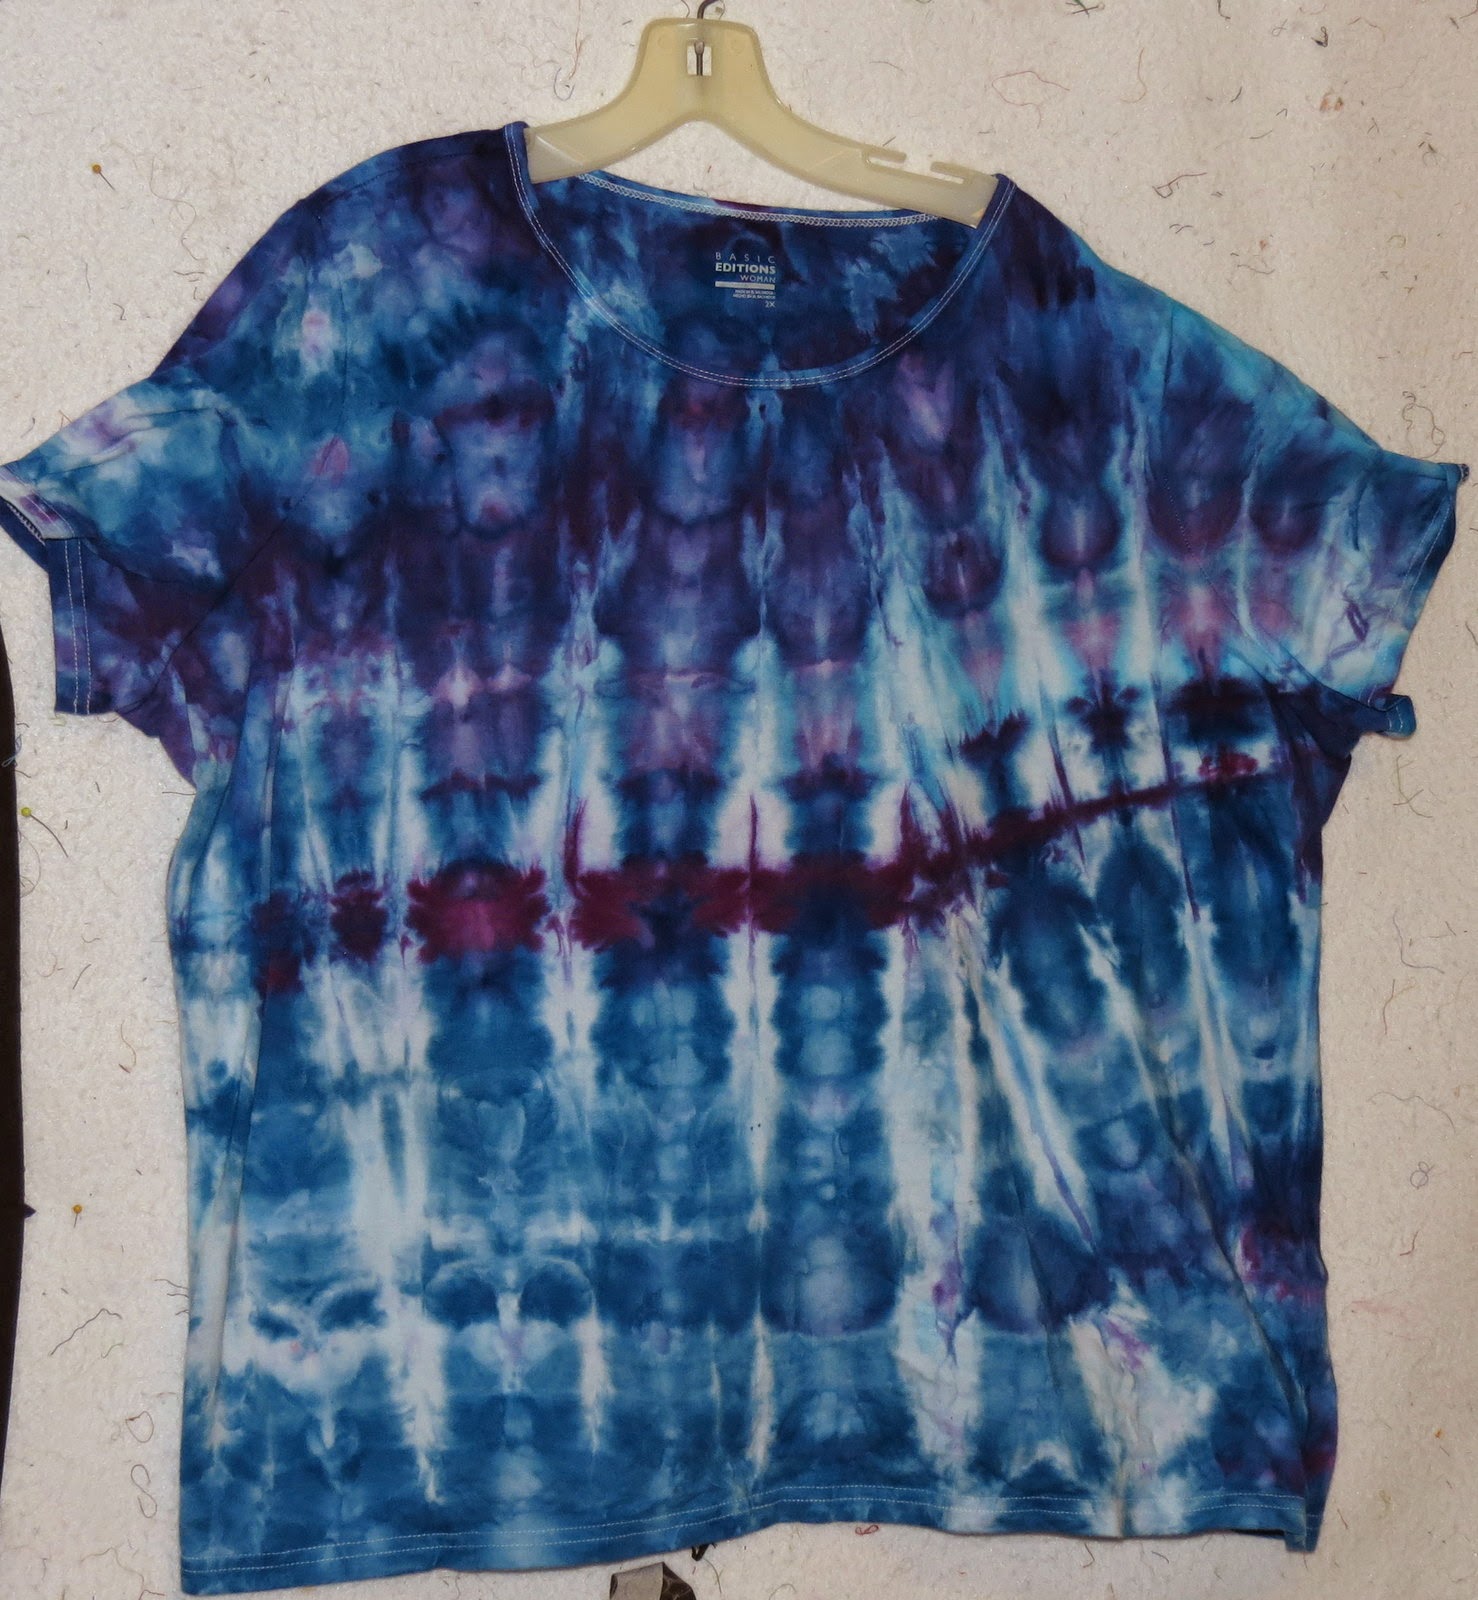 Beth's Blog: Back to Ice Dyeing!!